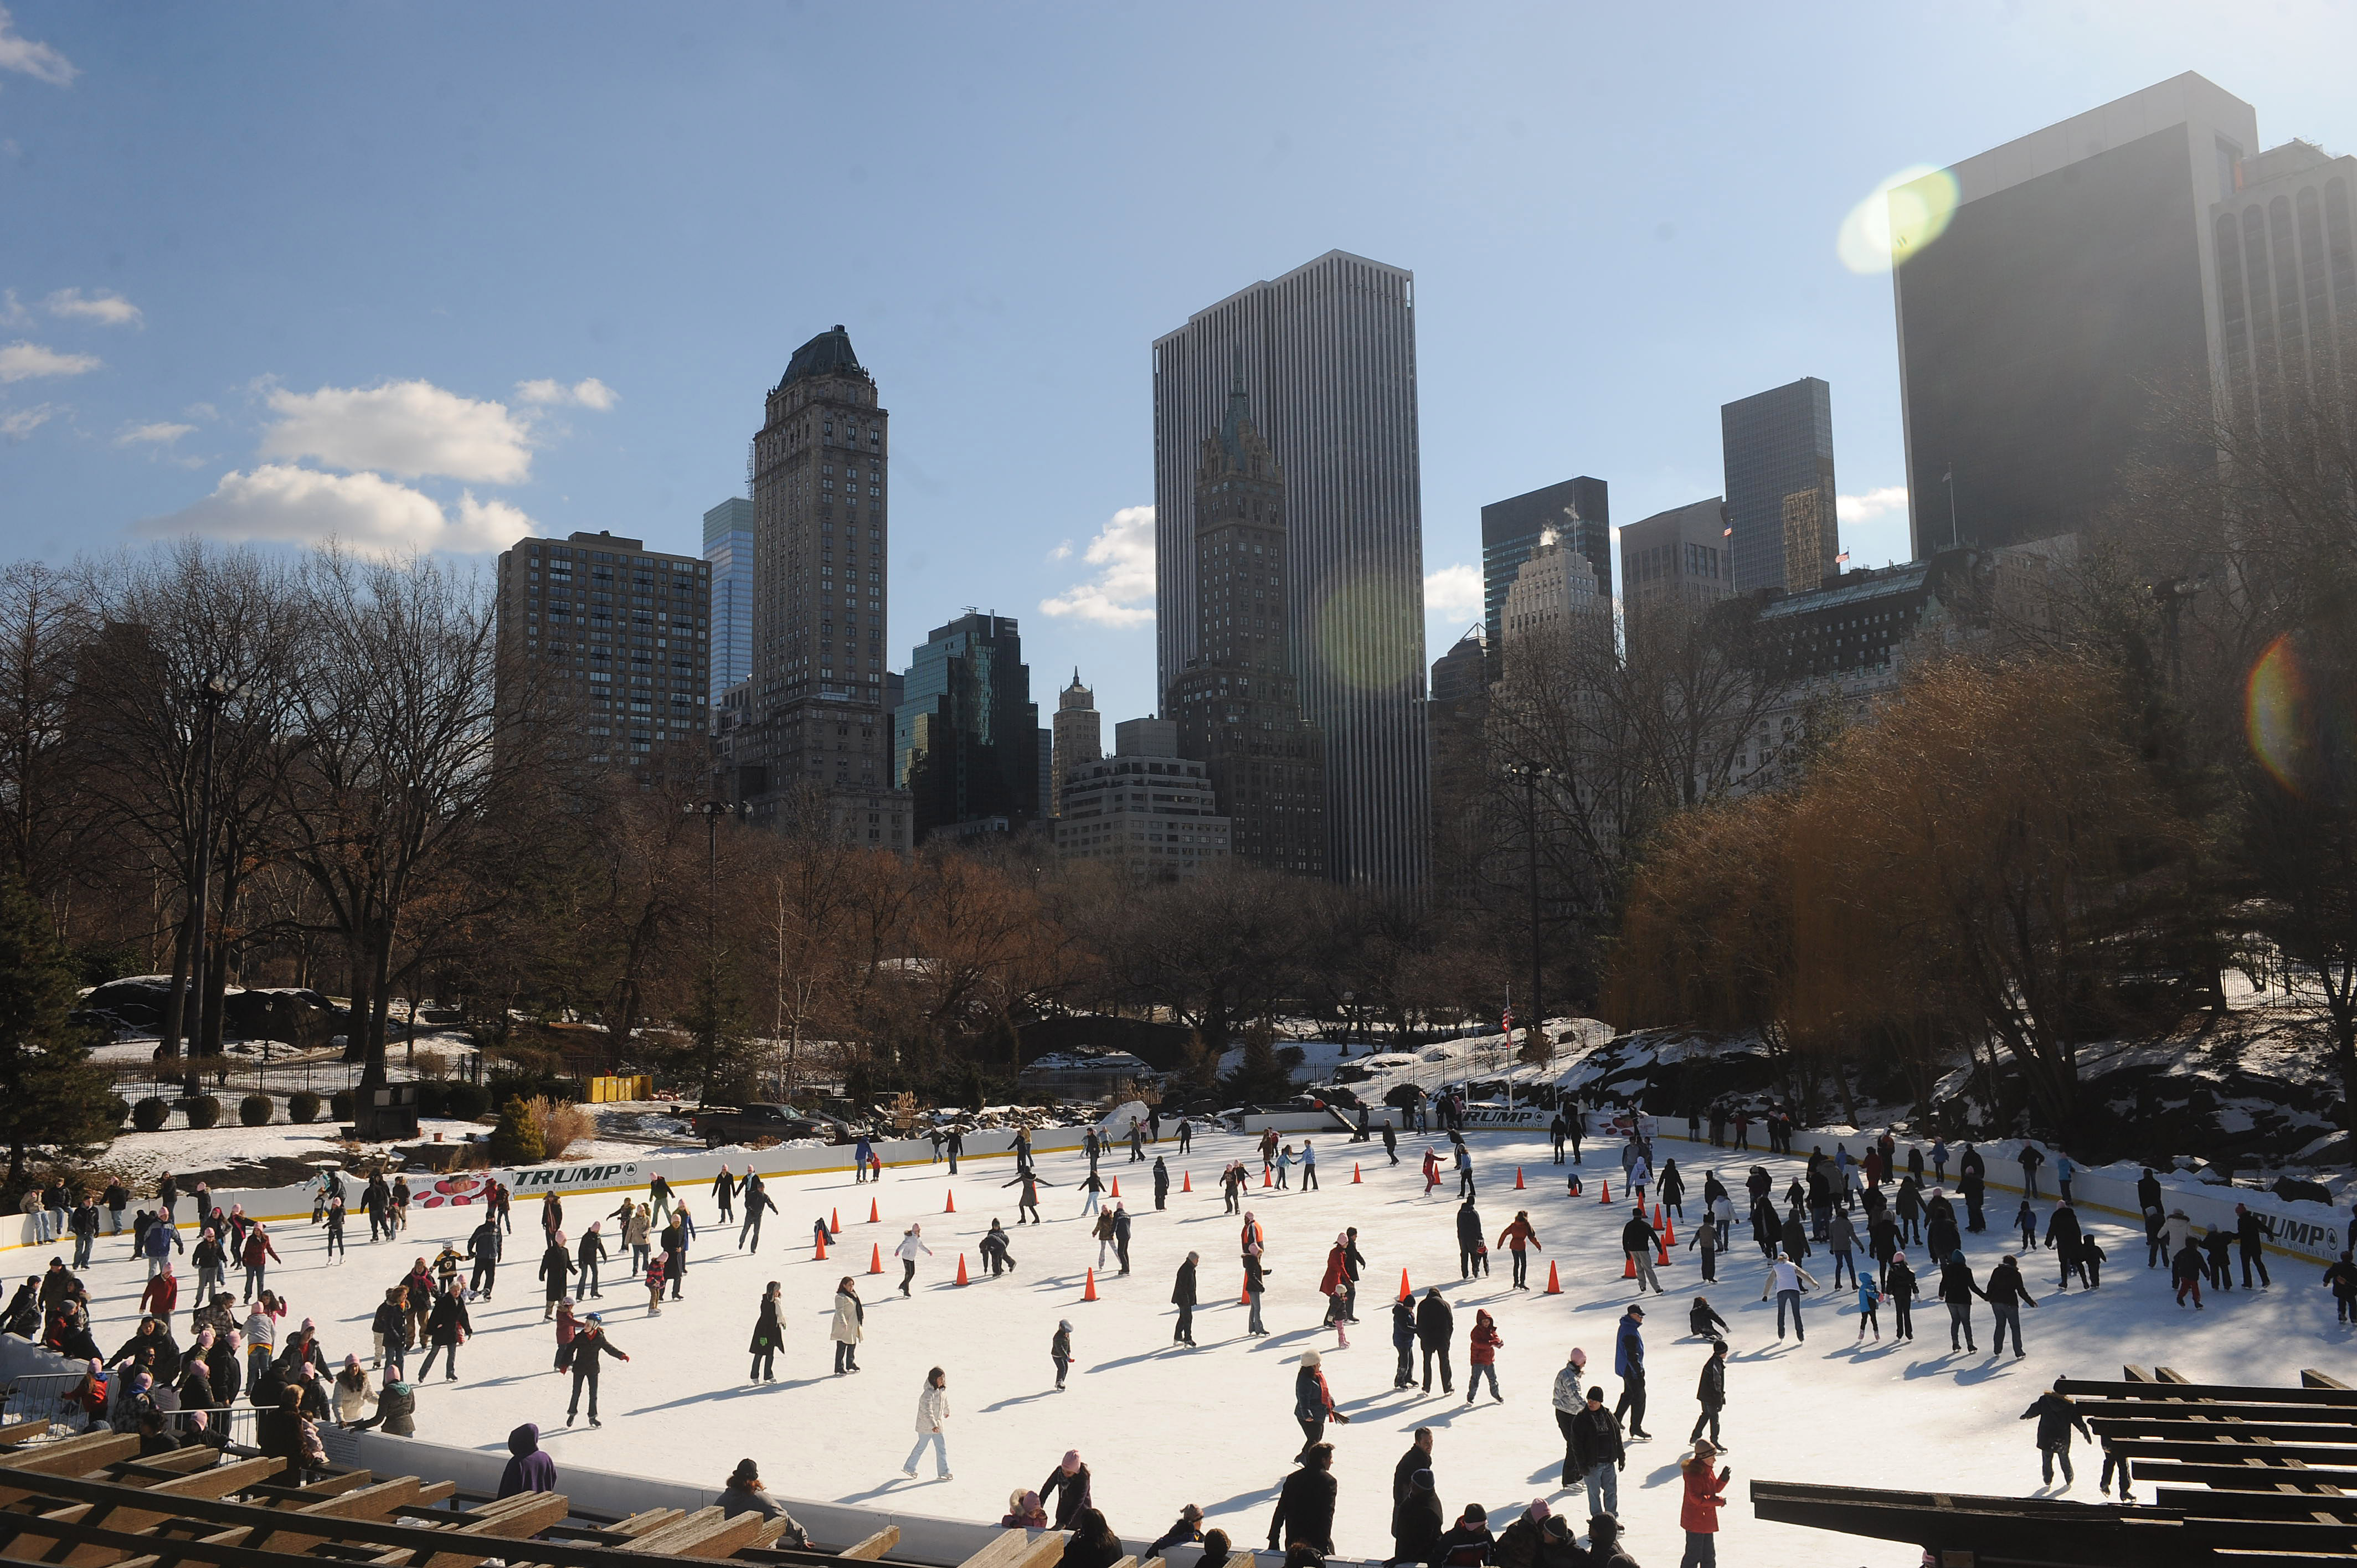 Wollman Rink Central park